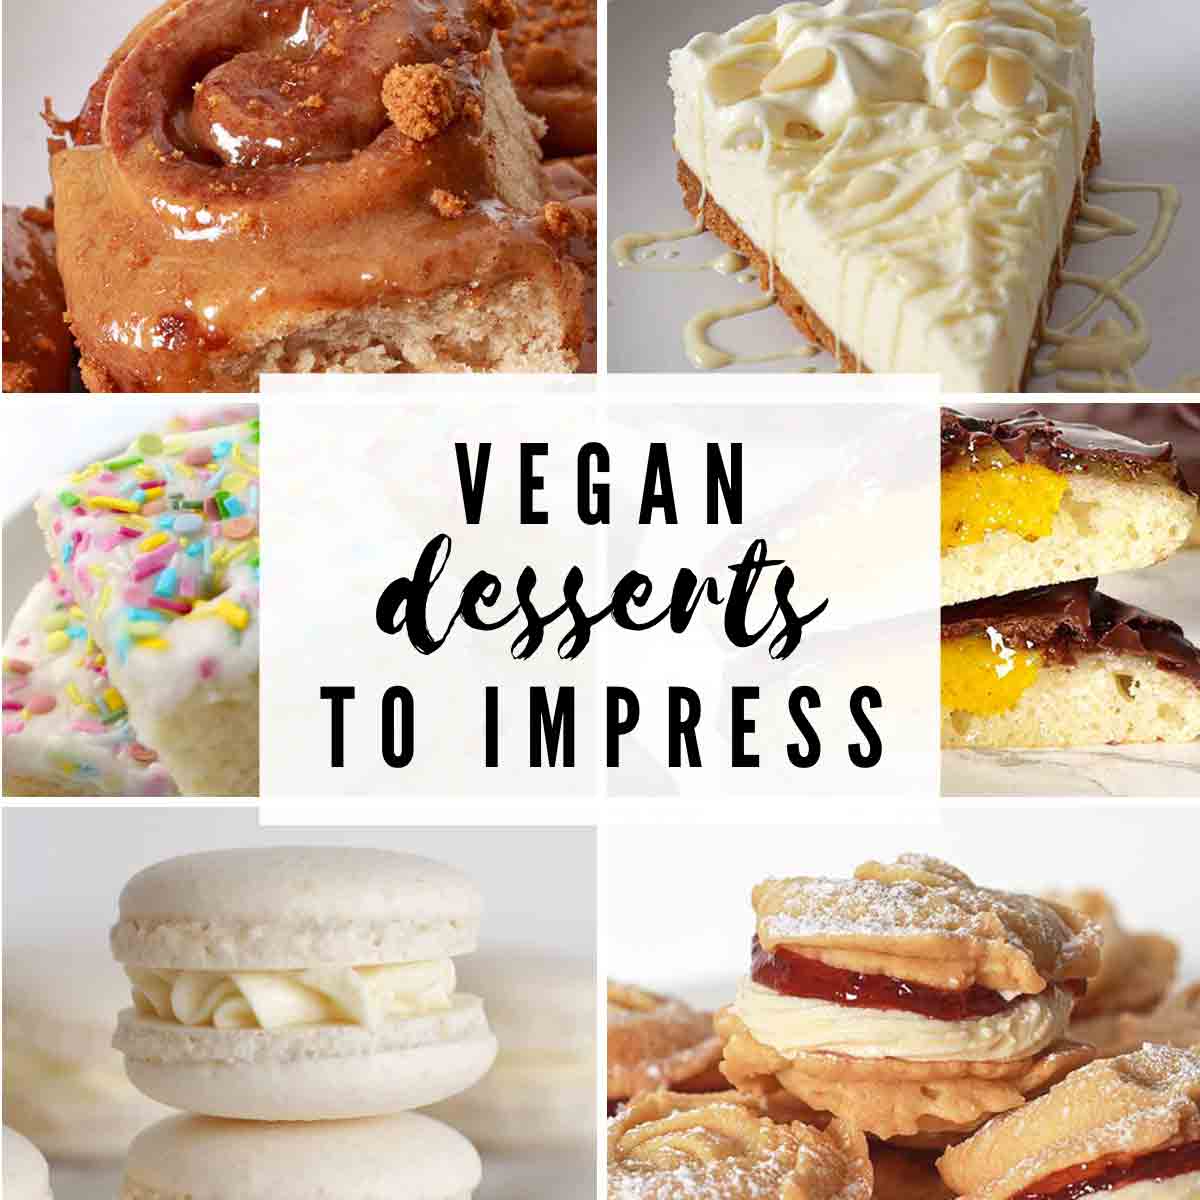 Image Collage Of Desserts With Text Overlay That Reads 'vegan Desserts To Impress'